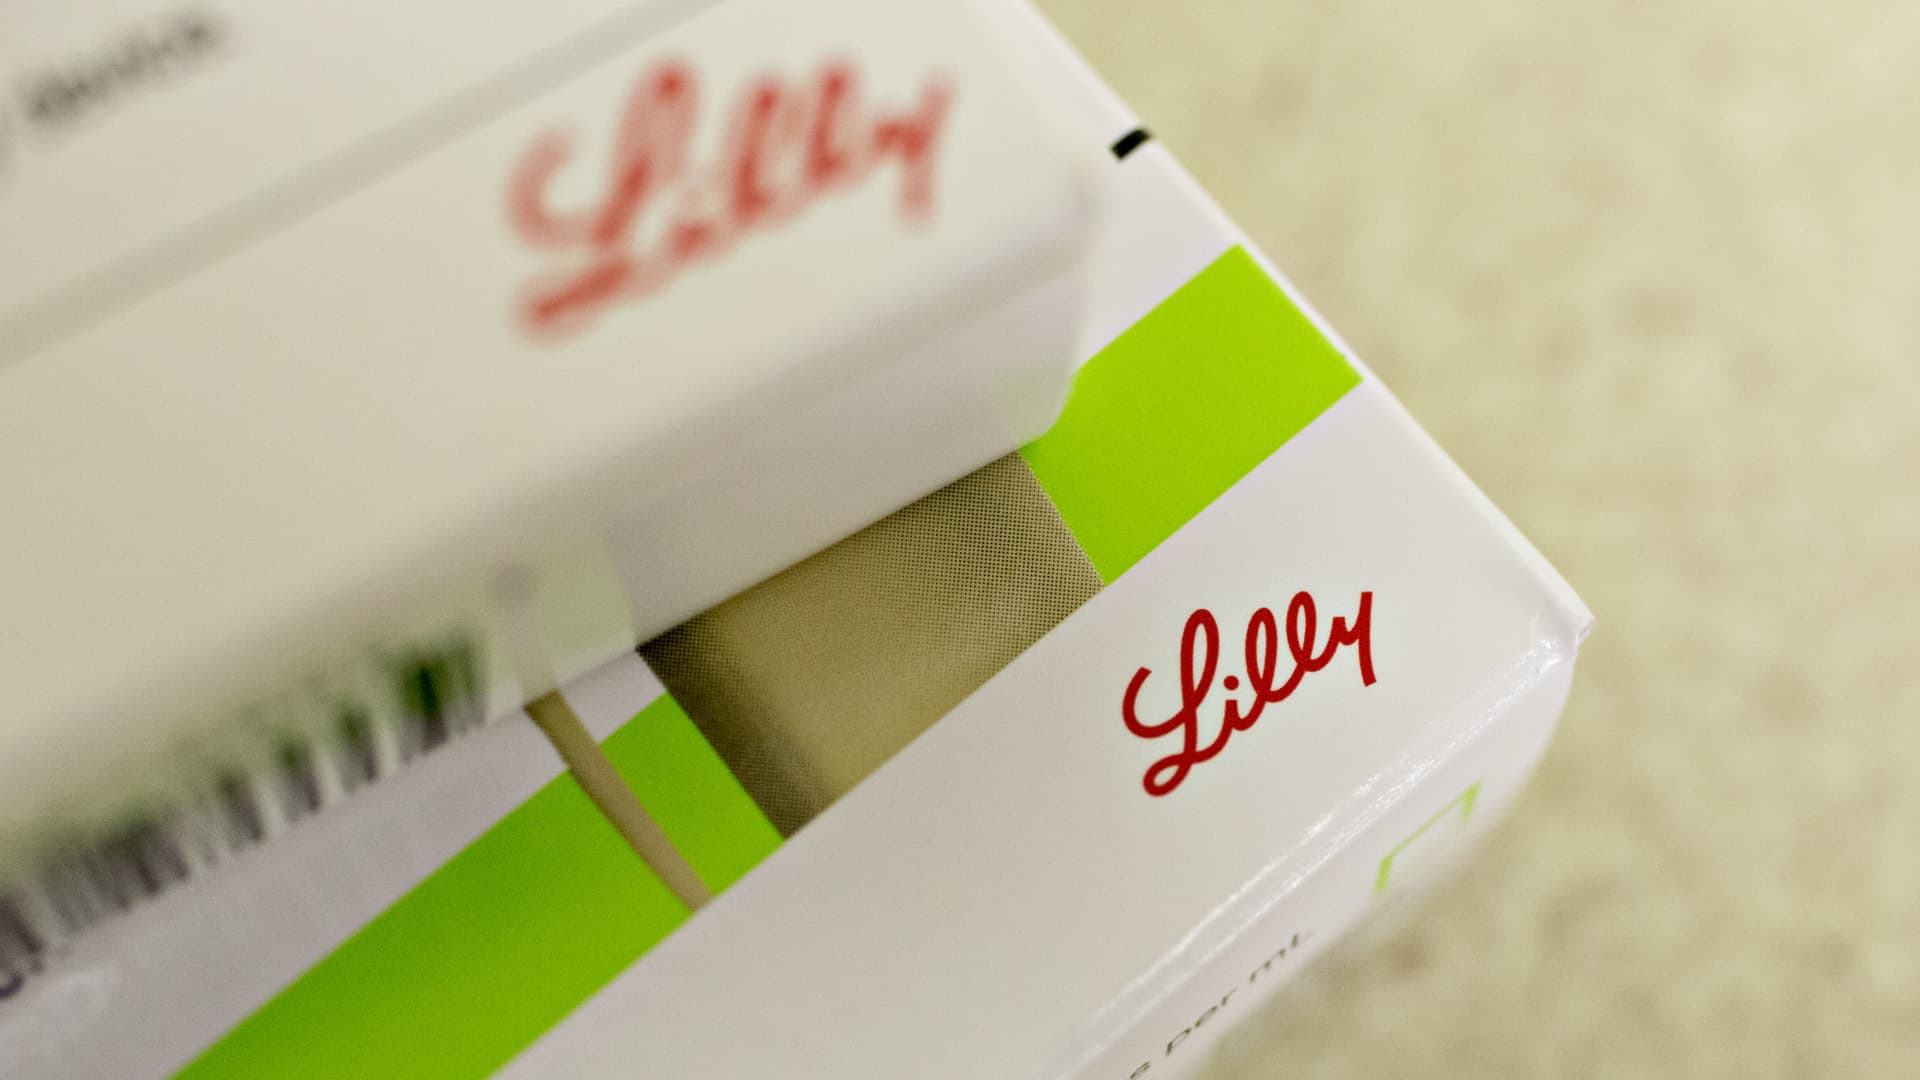 Lilly to cut insulin prices by 70%, cap costs at $35 per month for people with private insurance